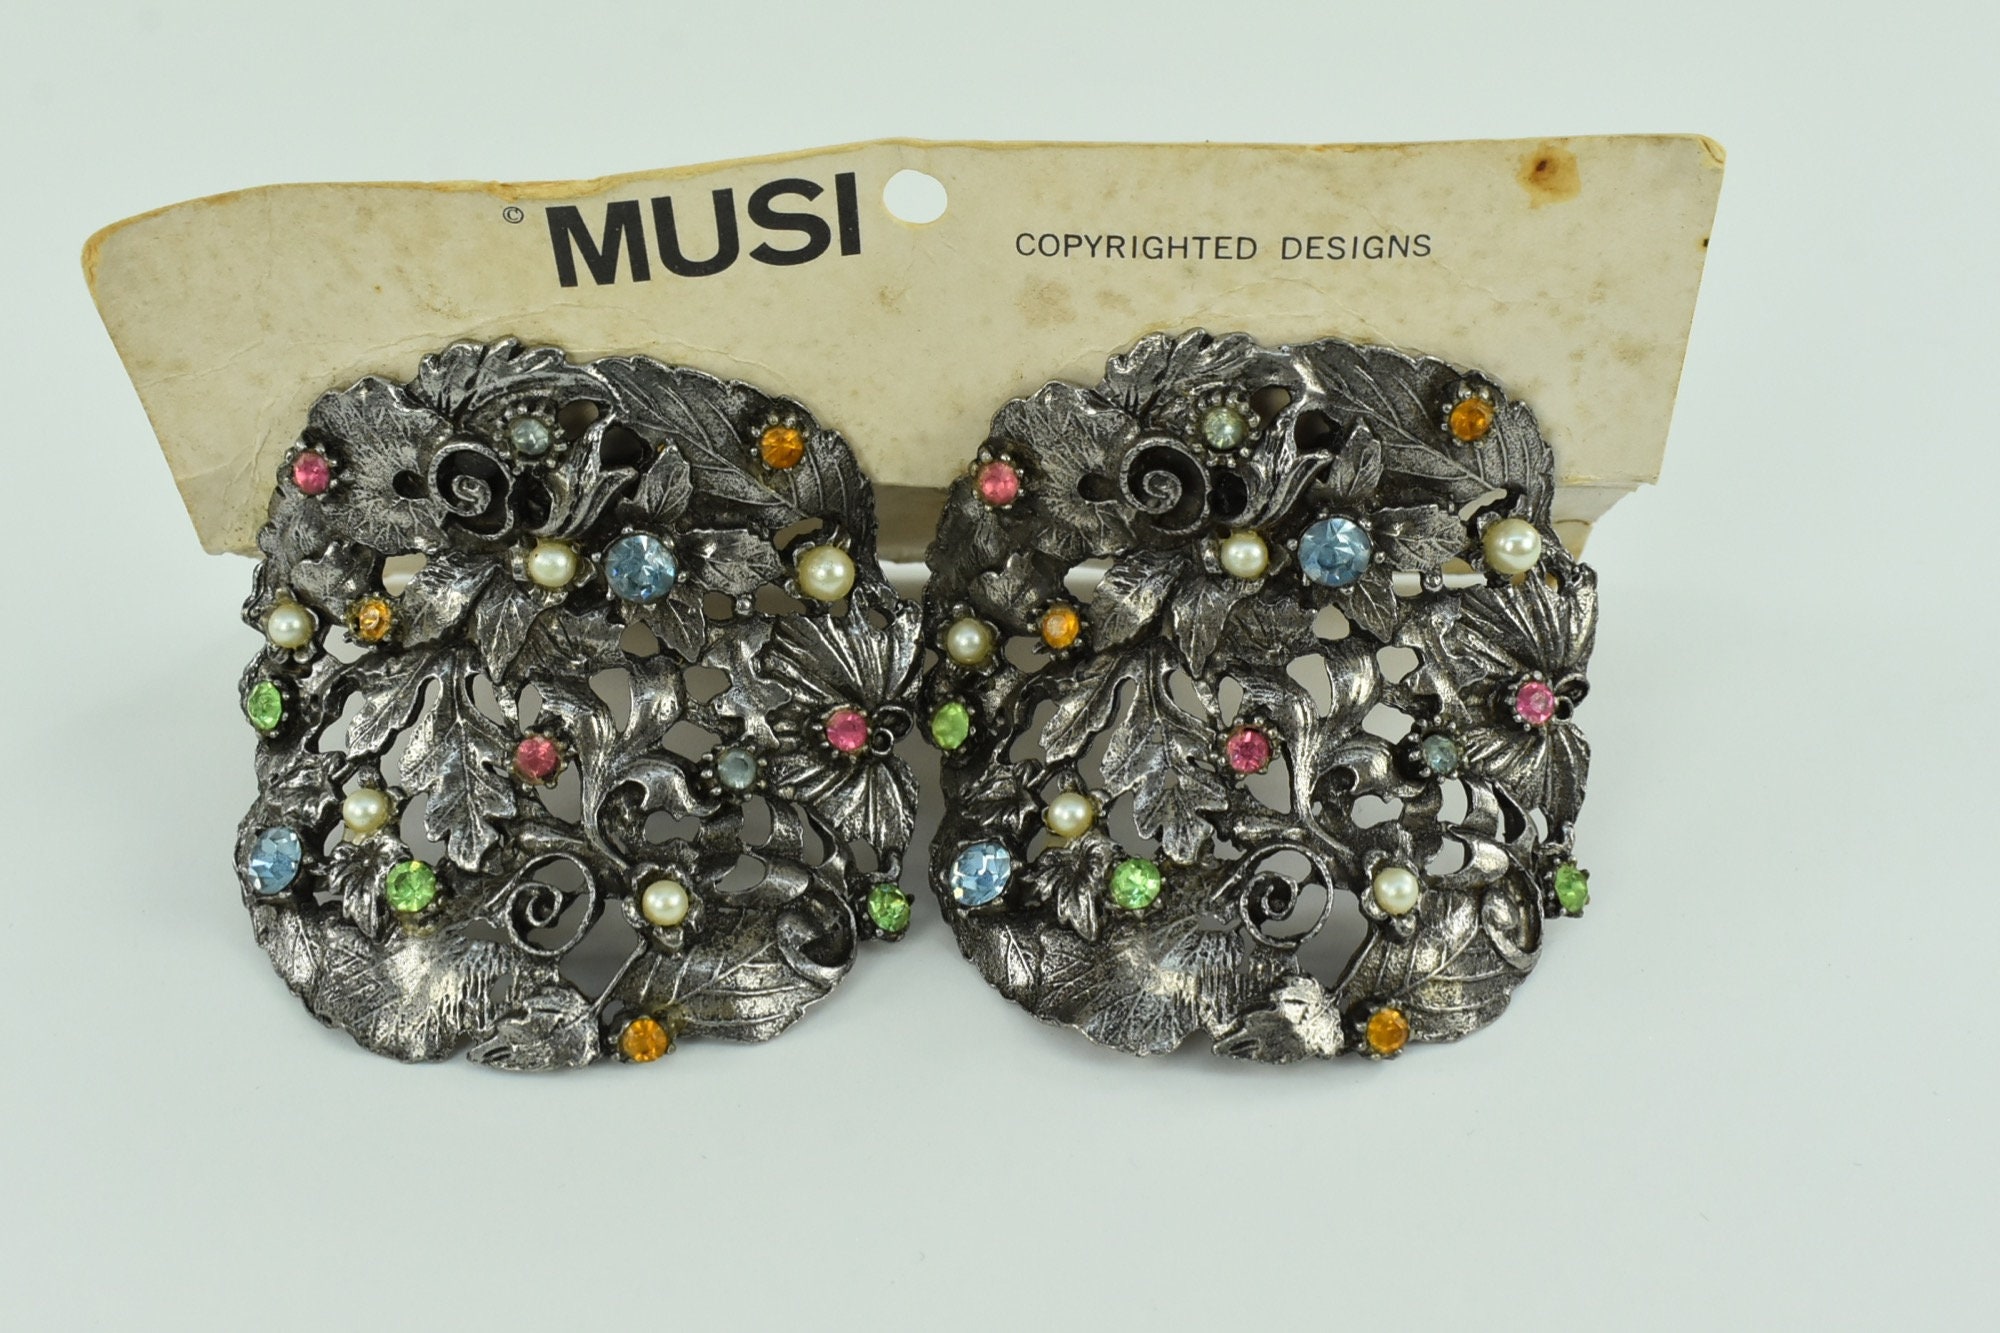 MUSI rhinestone shoe clips from the 60s – Find Vintage Beauty